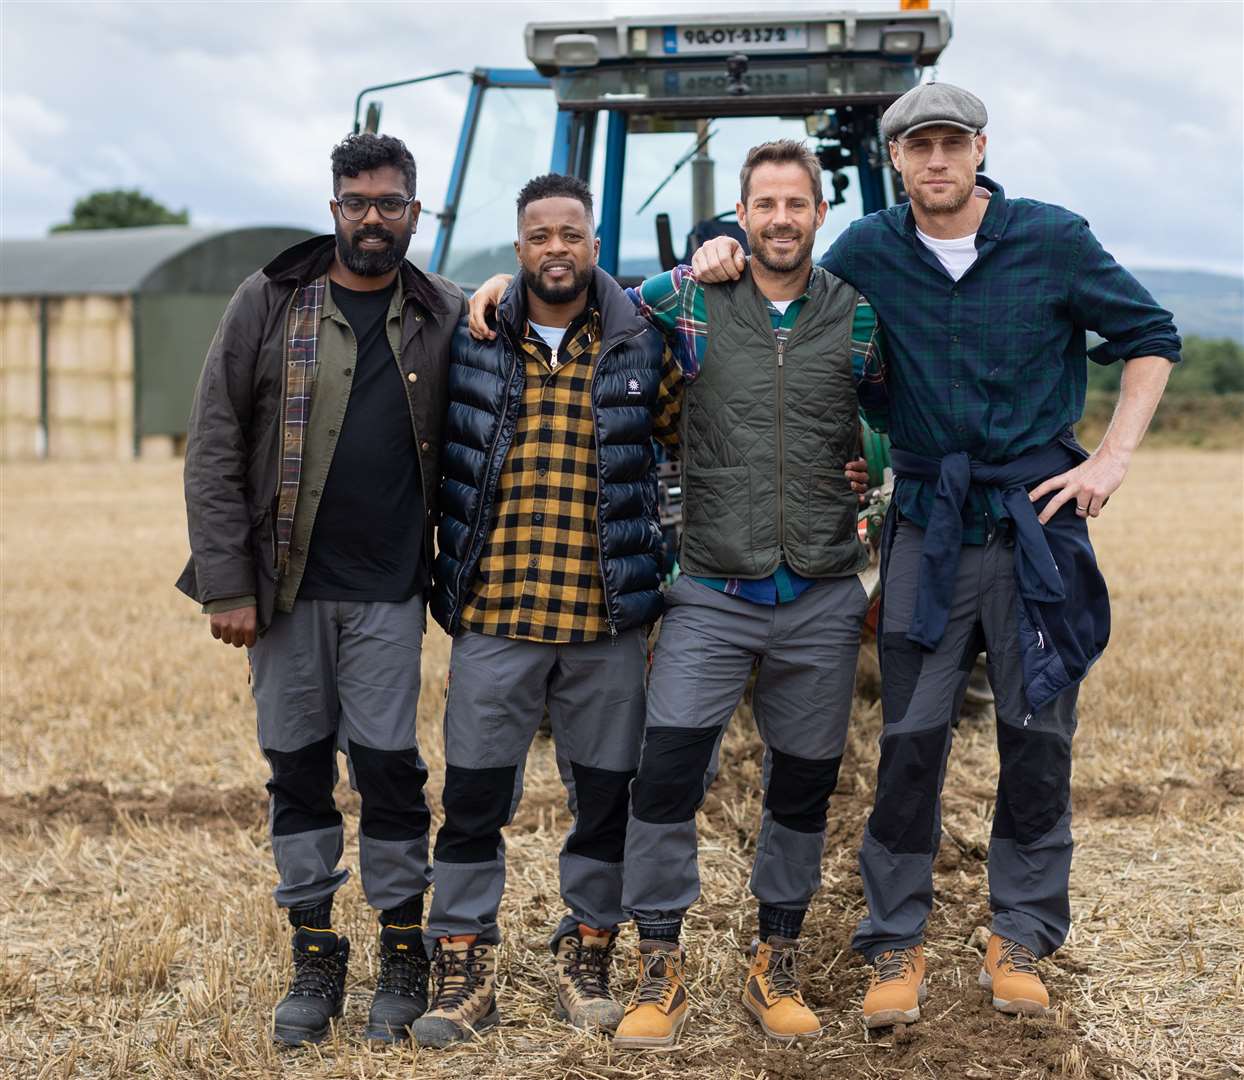 Jamie Redknapp in A League Of Their Own Road Trip with Romesh Ranganathan, Patrice Evra and Freddie Flintoff in March. PA Photo/Sky UK Ltd/CPL Productions